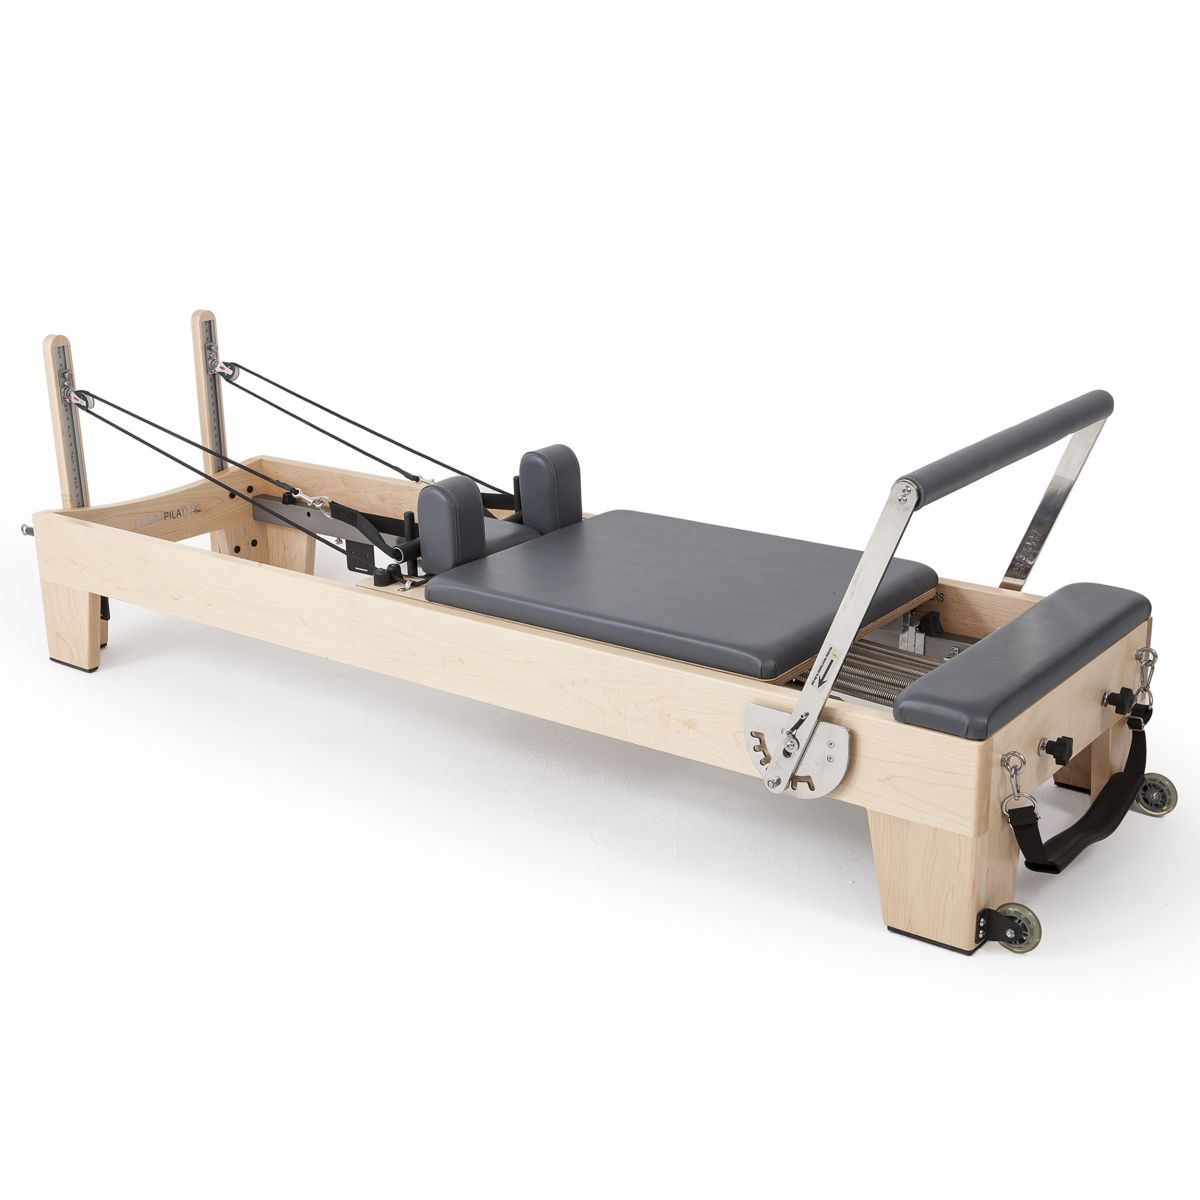 Buy Pilates Cadillac Reformers Online at The Lowest Prices – Pilates  Reformers Plus